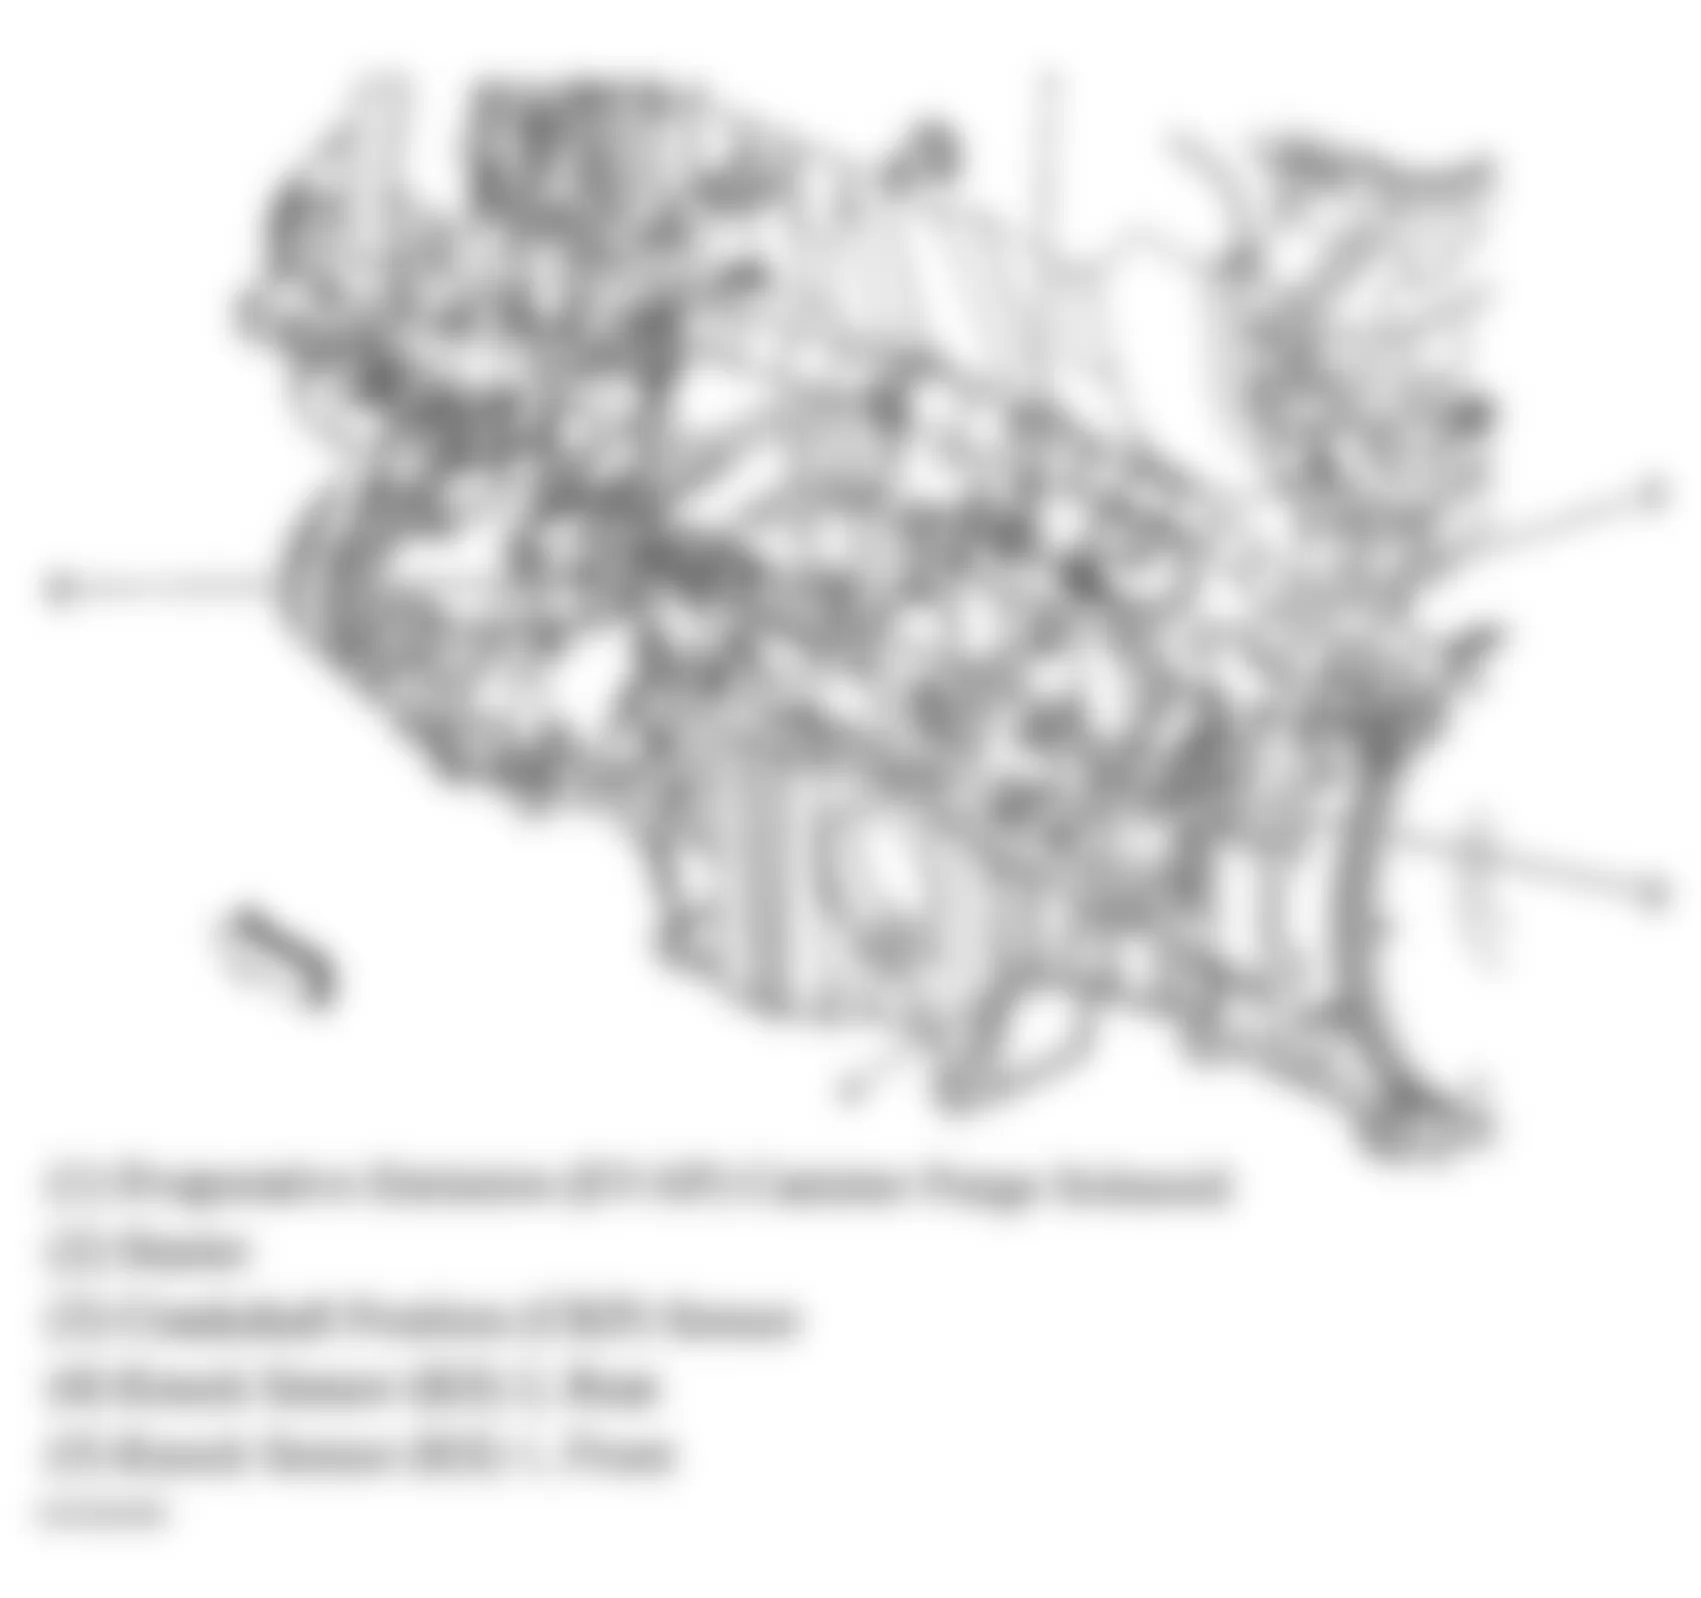 GMC Envoy XL 2005 - Component Locations -  Lower Left Side Of Engine (4.2L)